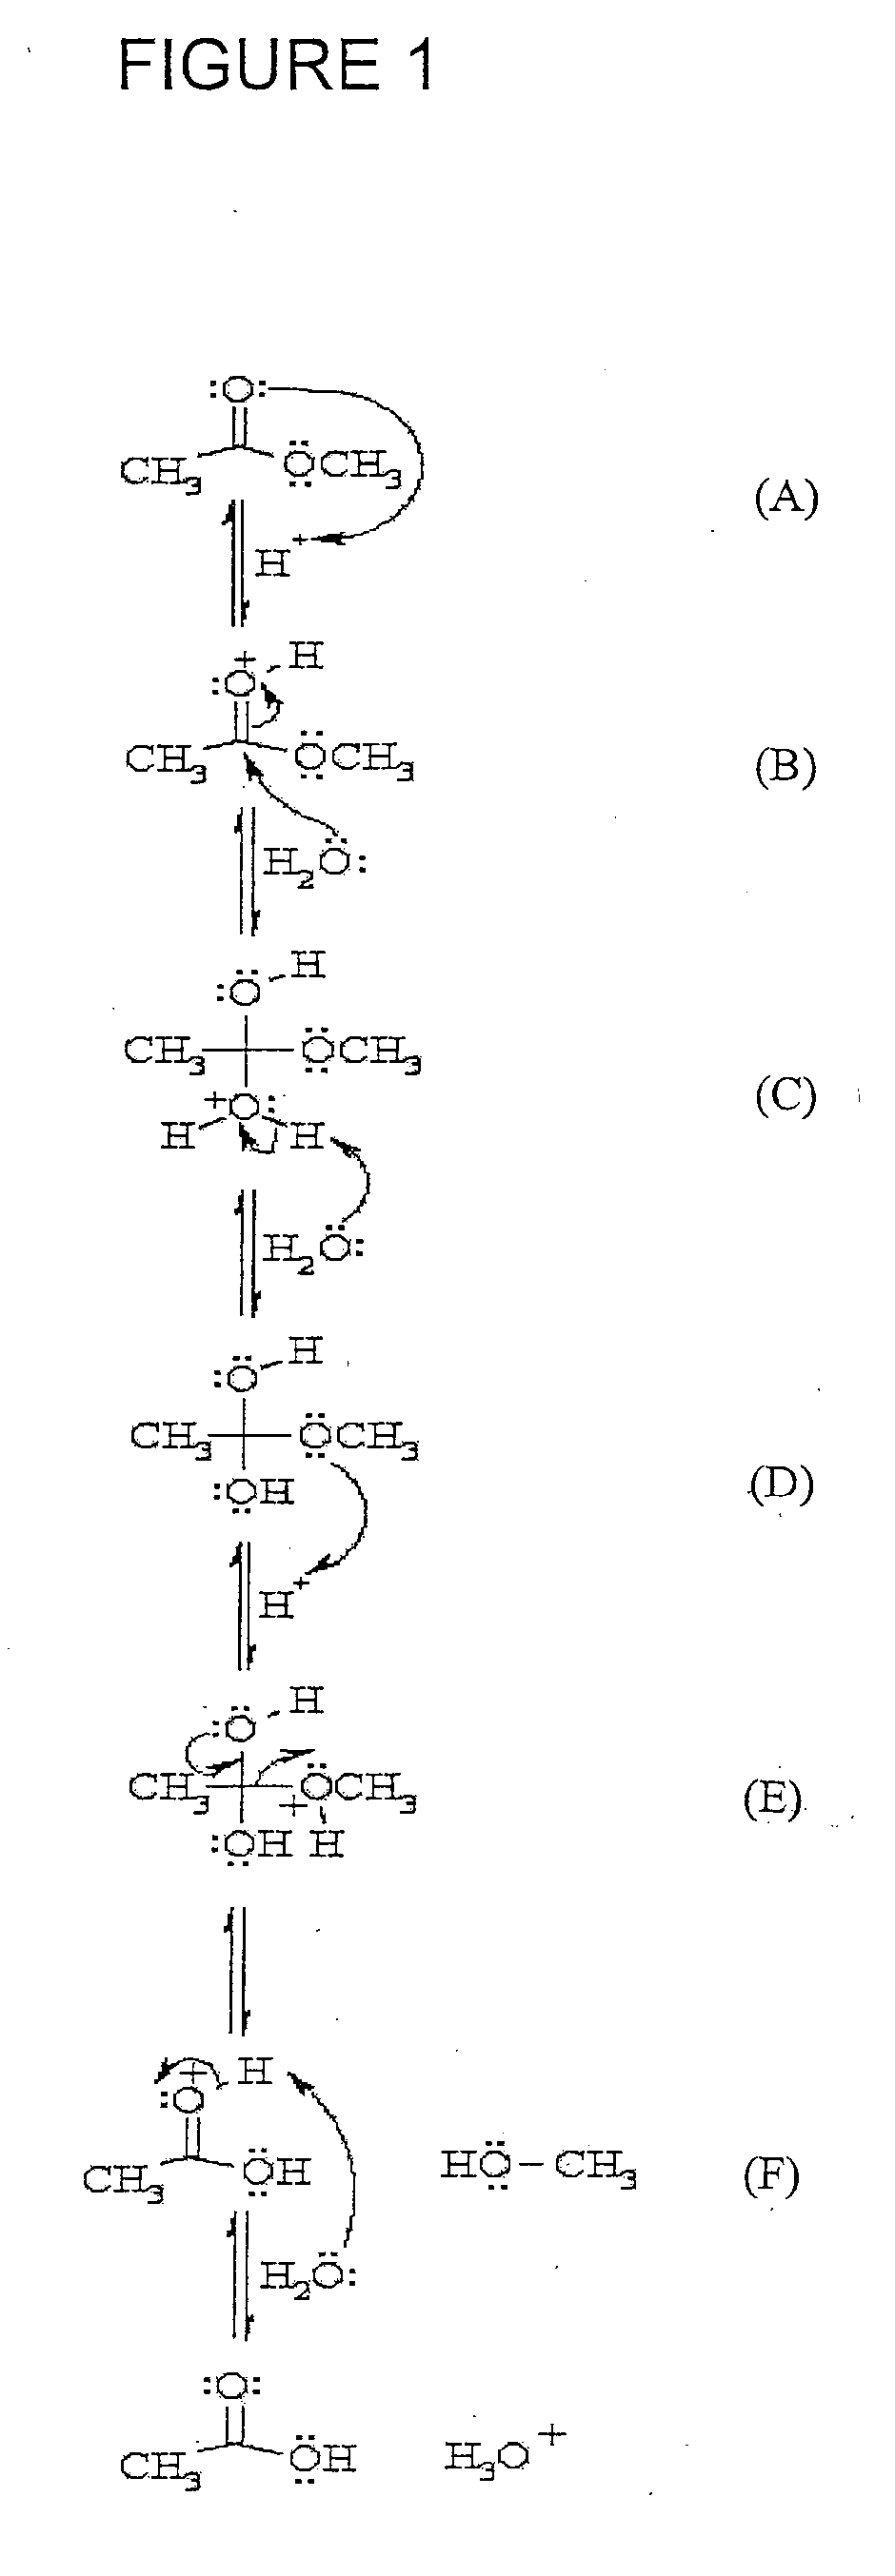 Method for producing pulp and lignin